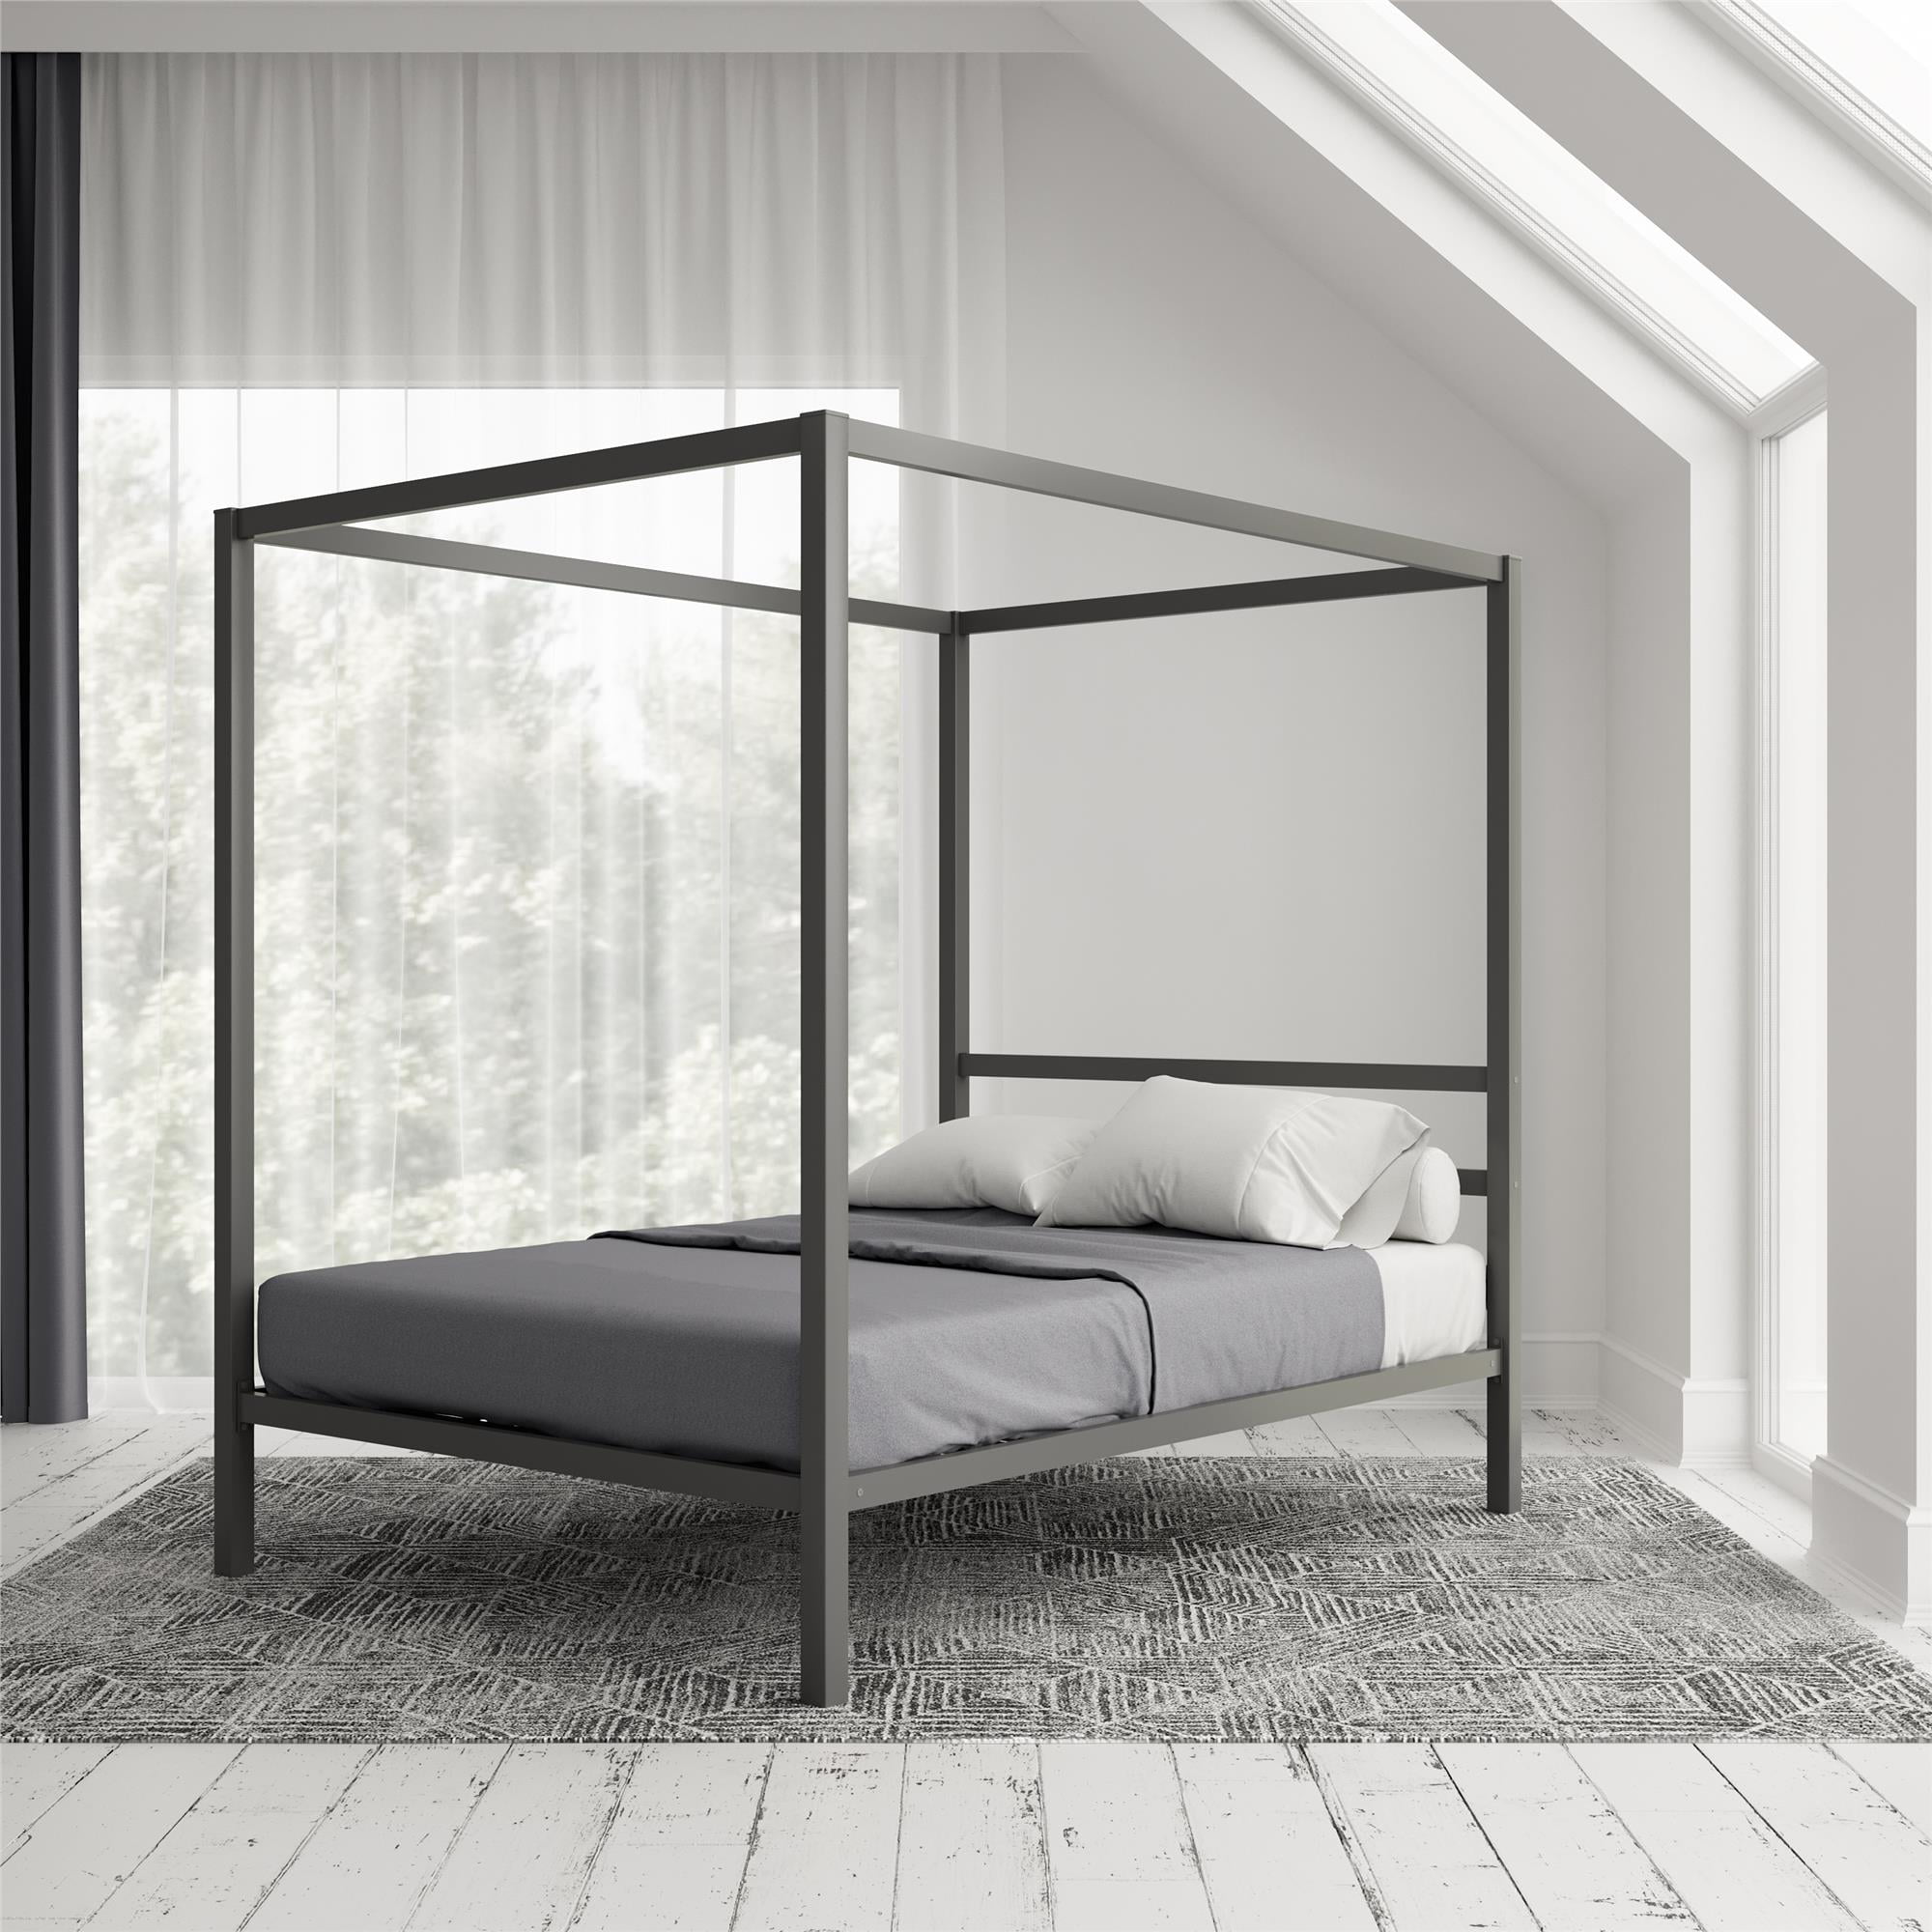 Bellamy Studios Modern Metal Canopy Bed, Silver Canopy Bed Frame